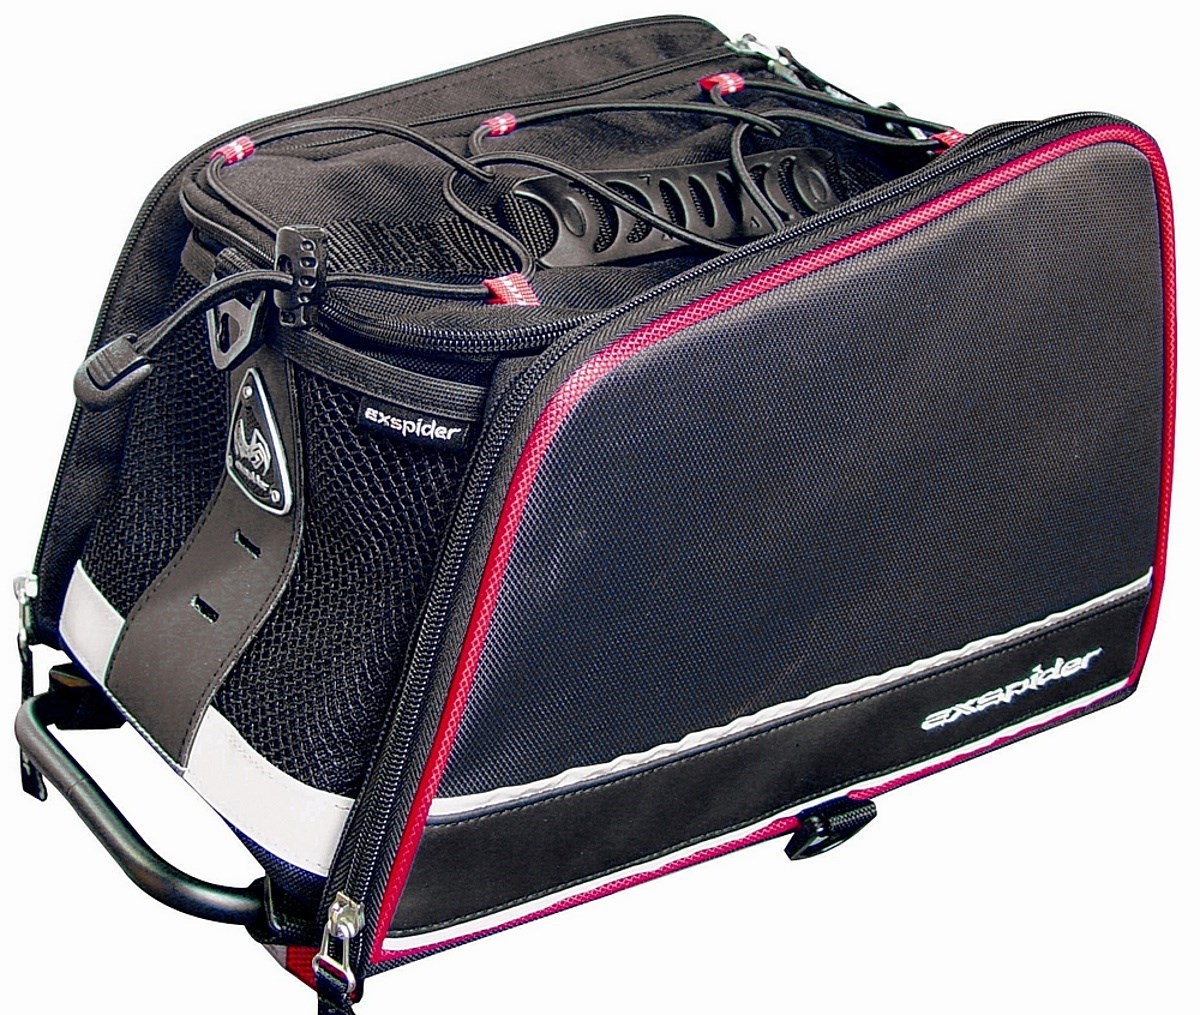 Exspider Rack Bag 10 Litres product image